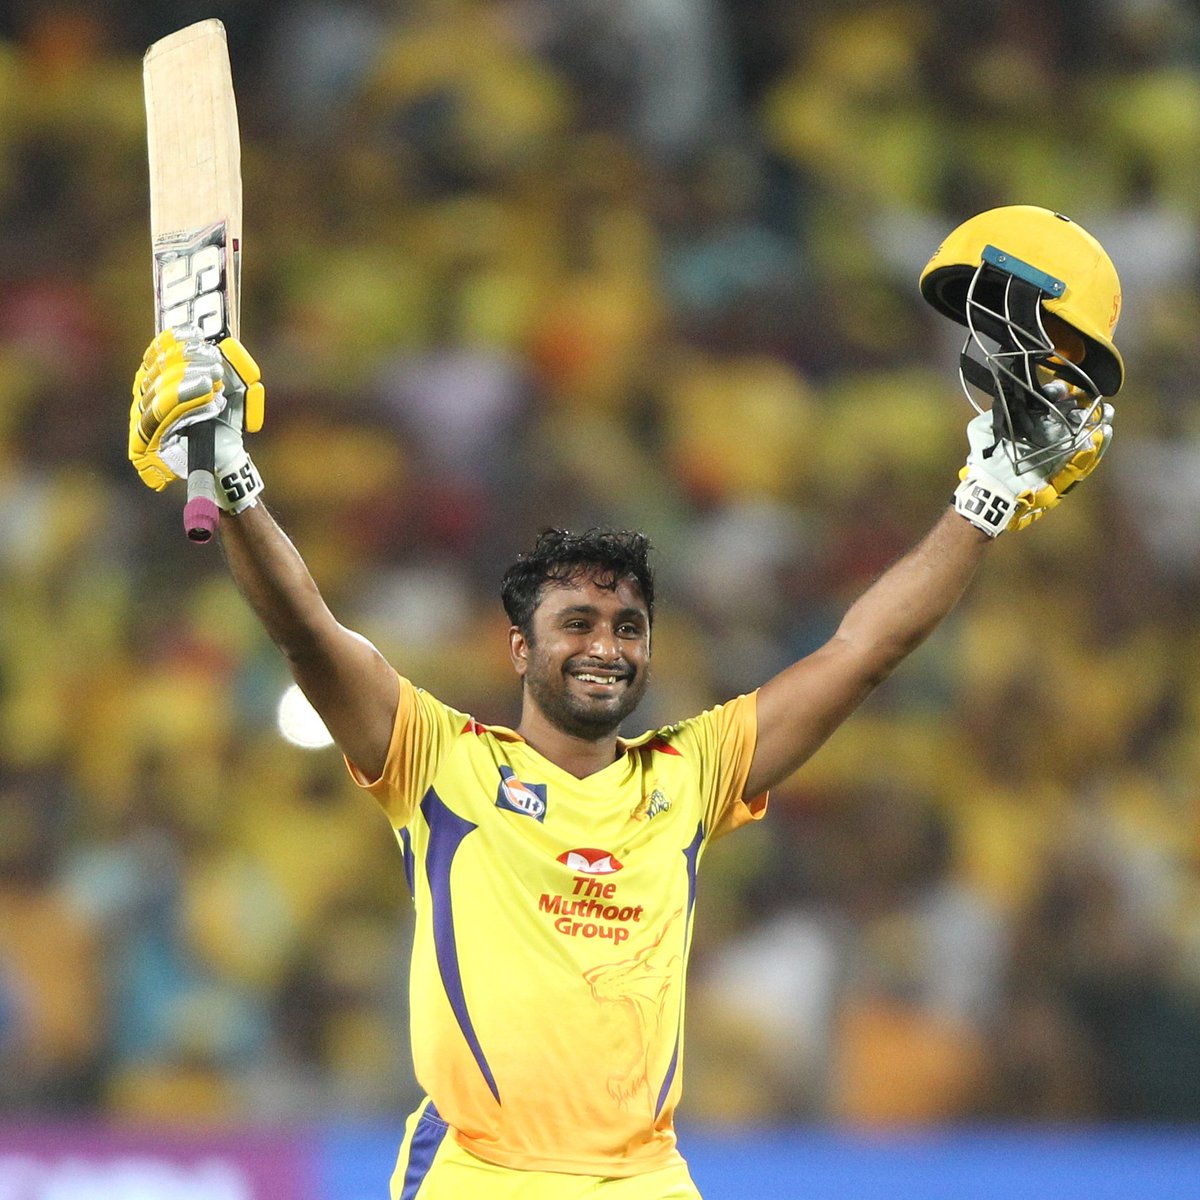 On this Day in 2018,Rayudu scored his 1st Ever IPL 100 against SRH!Some interesting facts & stats regarding Ambati Rayudu's fabulous 2018 season with Chennai Super Kings:A Thread: